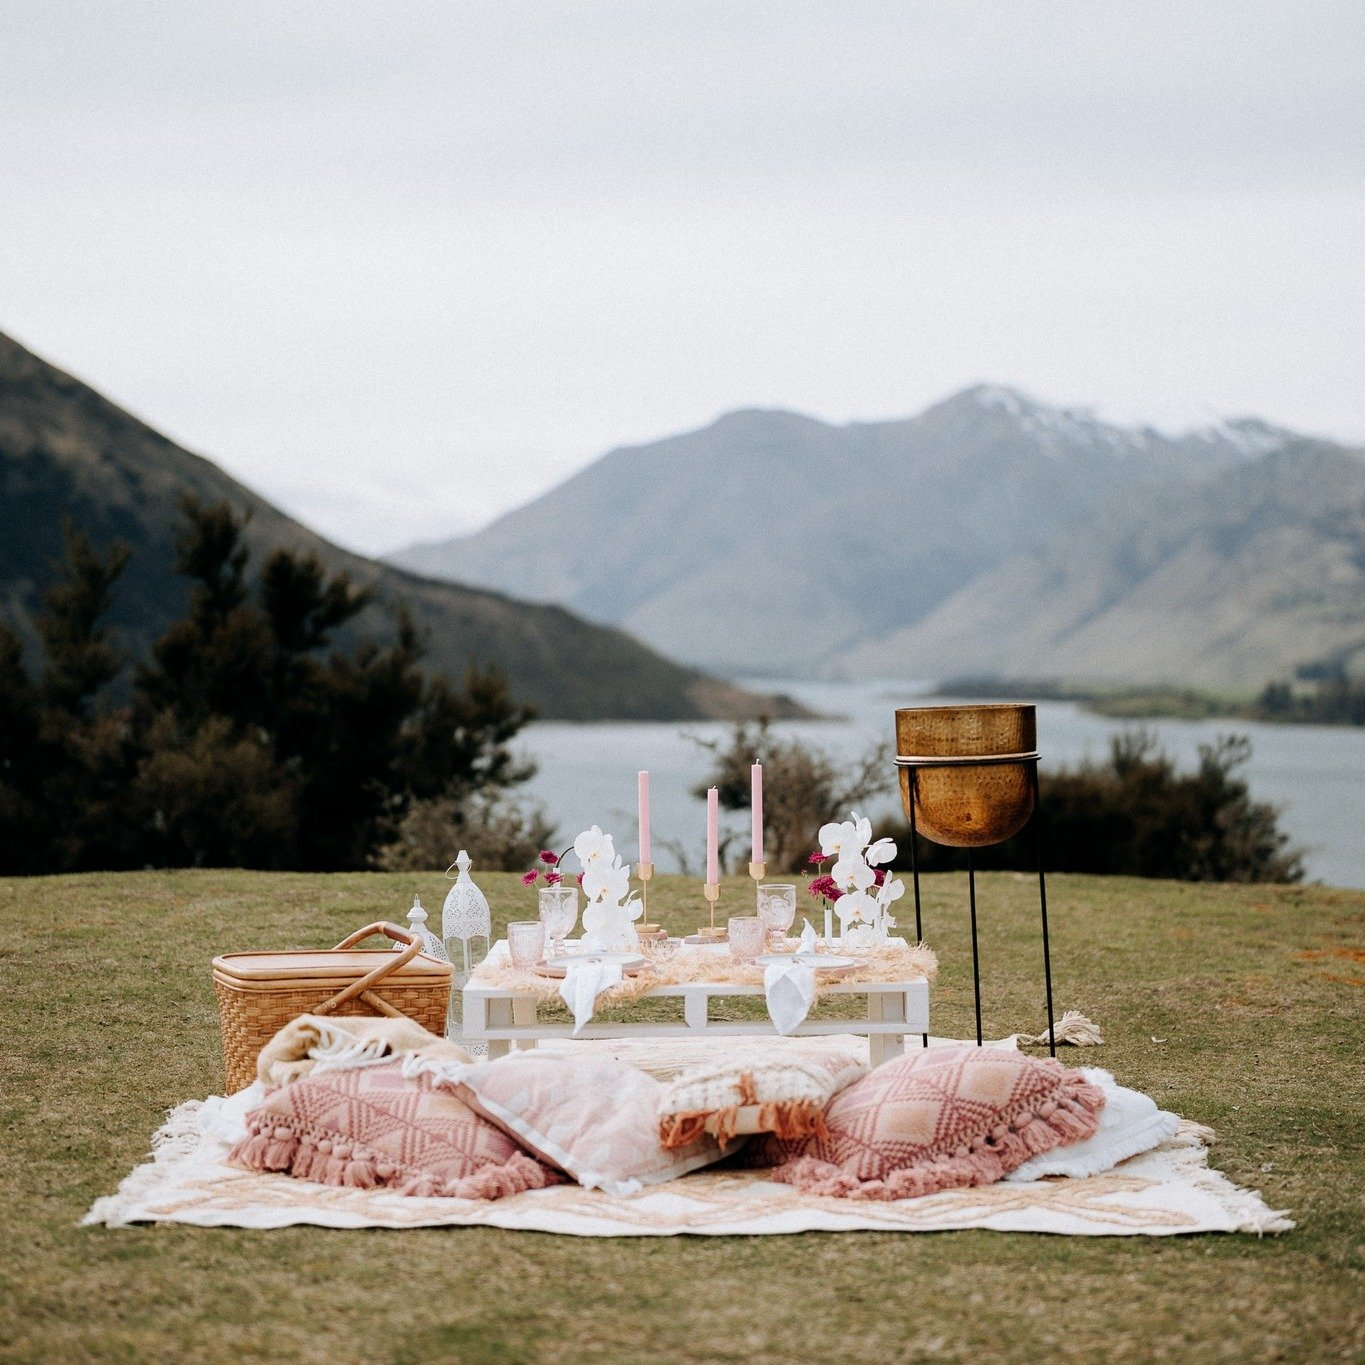 A whimsical proposal wrapped in pink tones, amidst the mountains that make the moment pure magic 💖 

📸  @katealexandraphoto